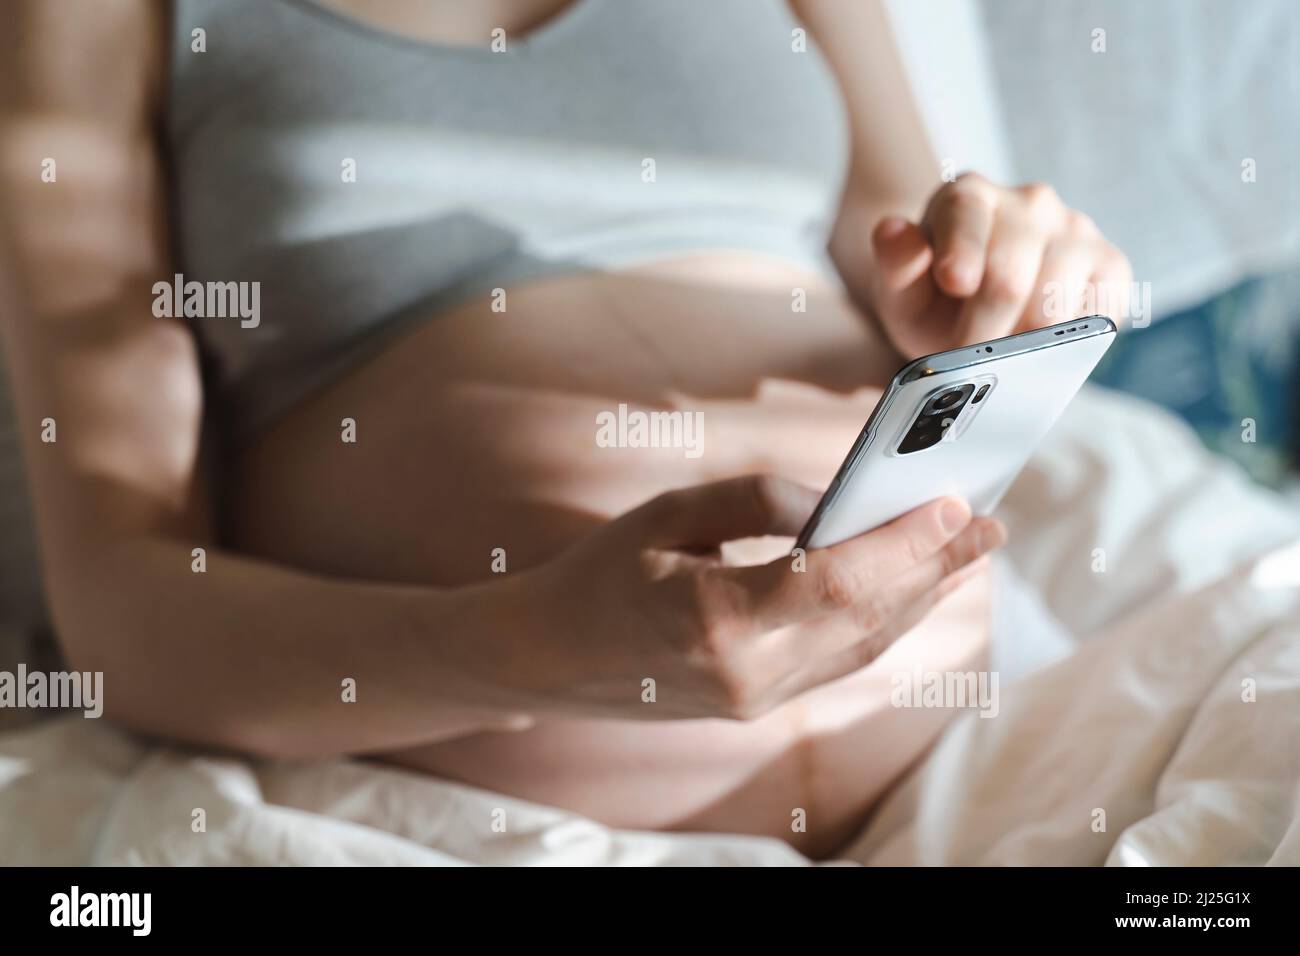 A pregnant woman uses a smartphone while relaxing in her home bed. Internet, shopping, communication during pregnancy and before the birth of a child. Women's and newborn health. High quality photo Stock Photo